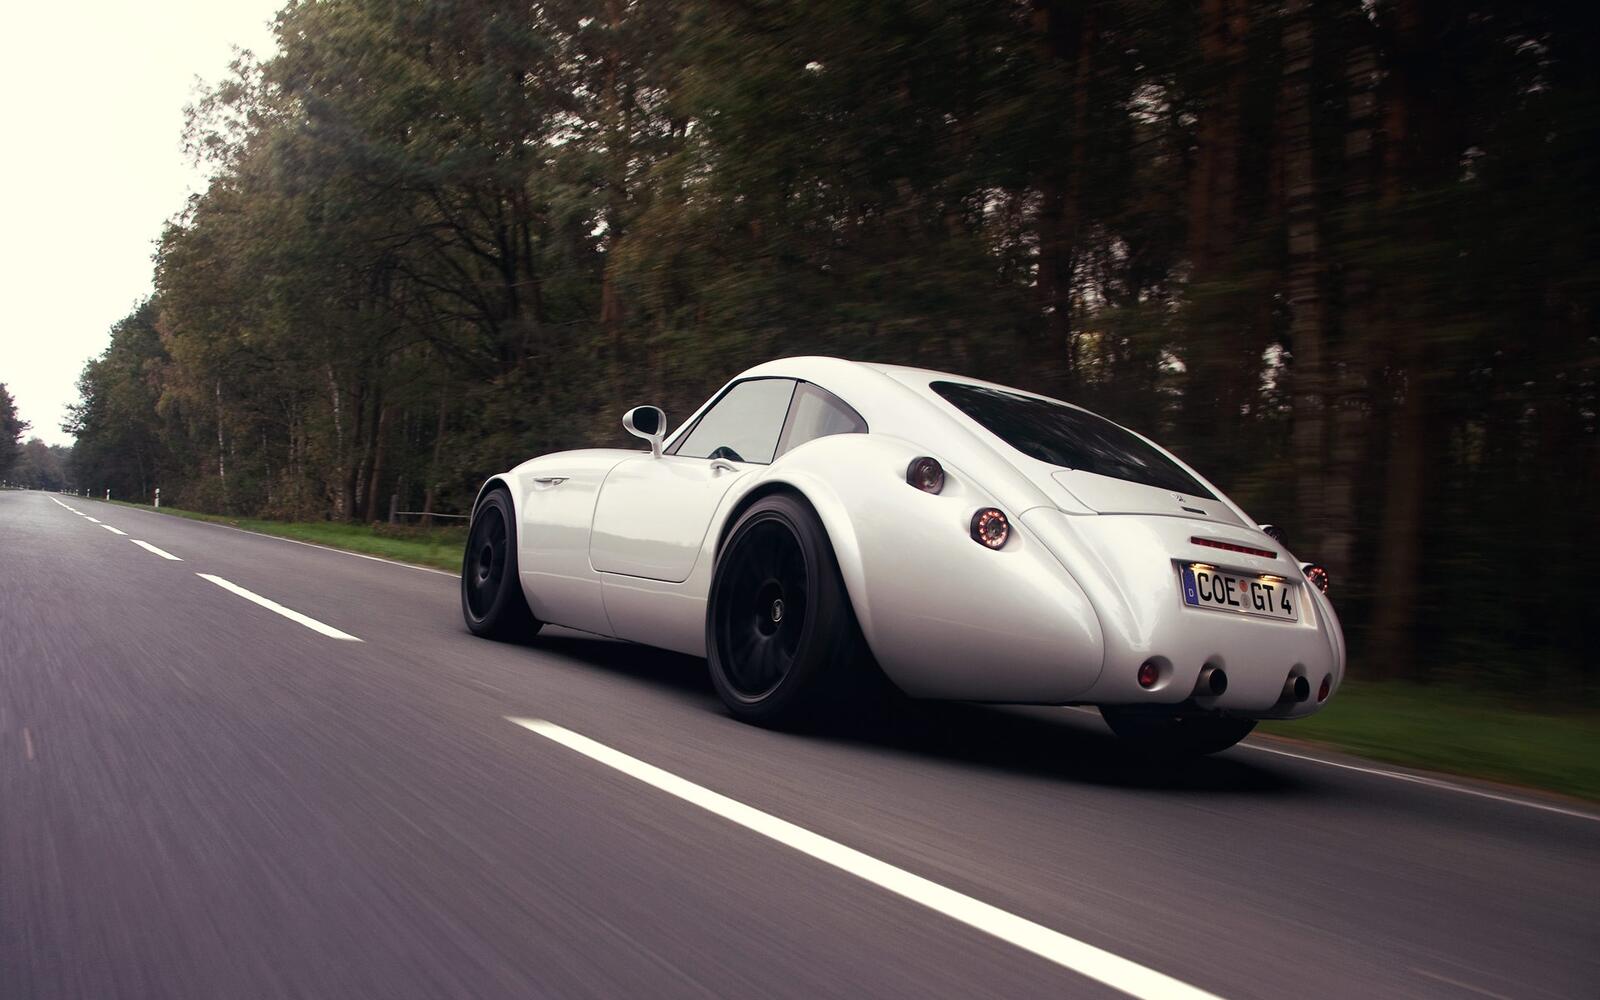 Free photo TVR Sagaris driving on a country highway rear view